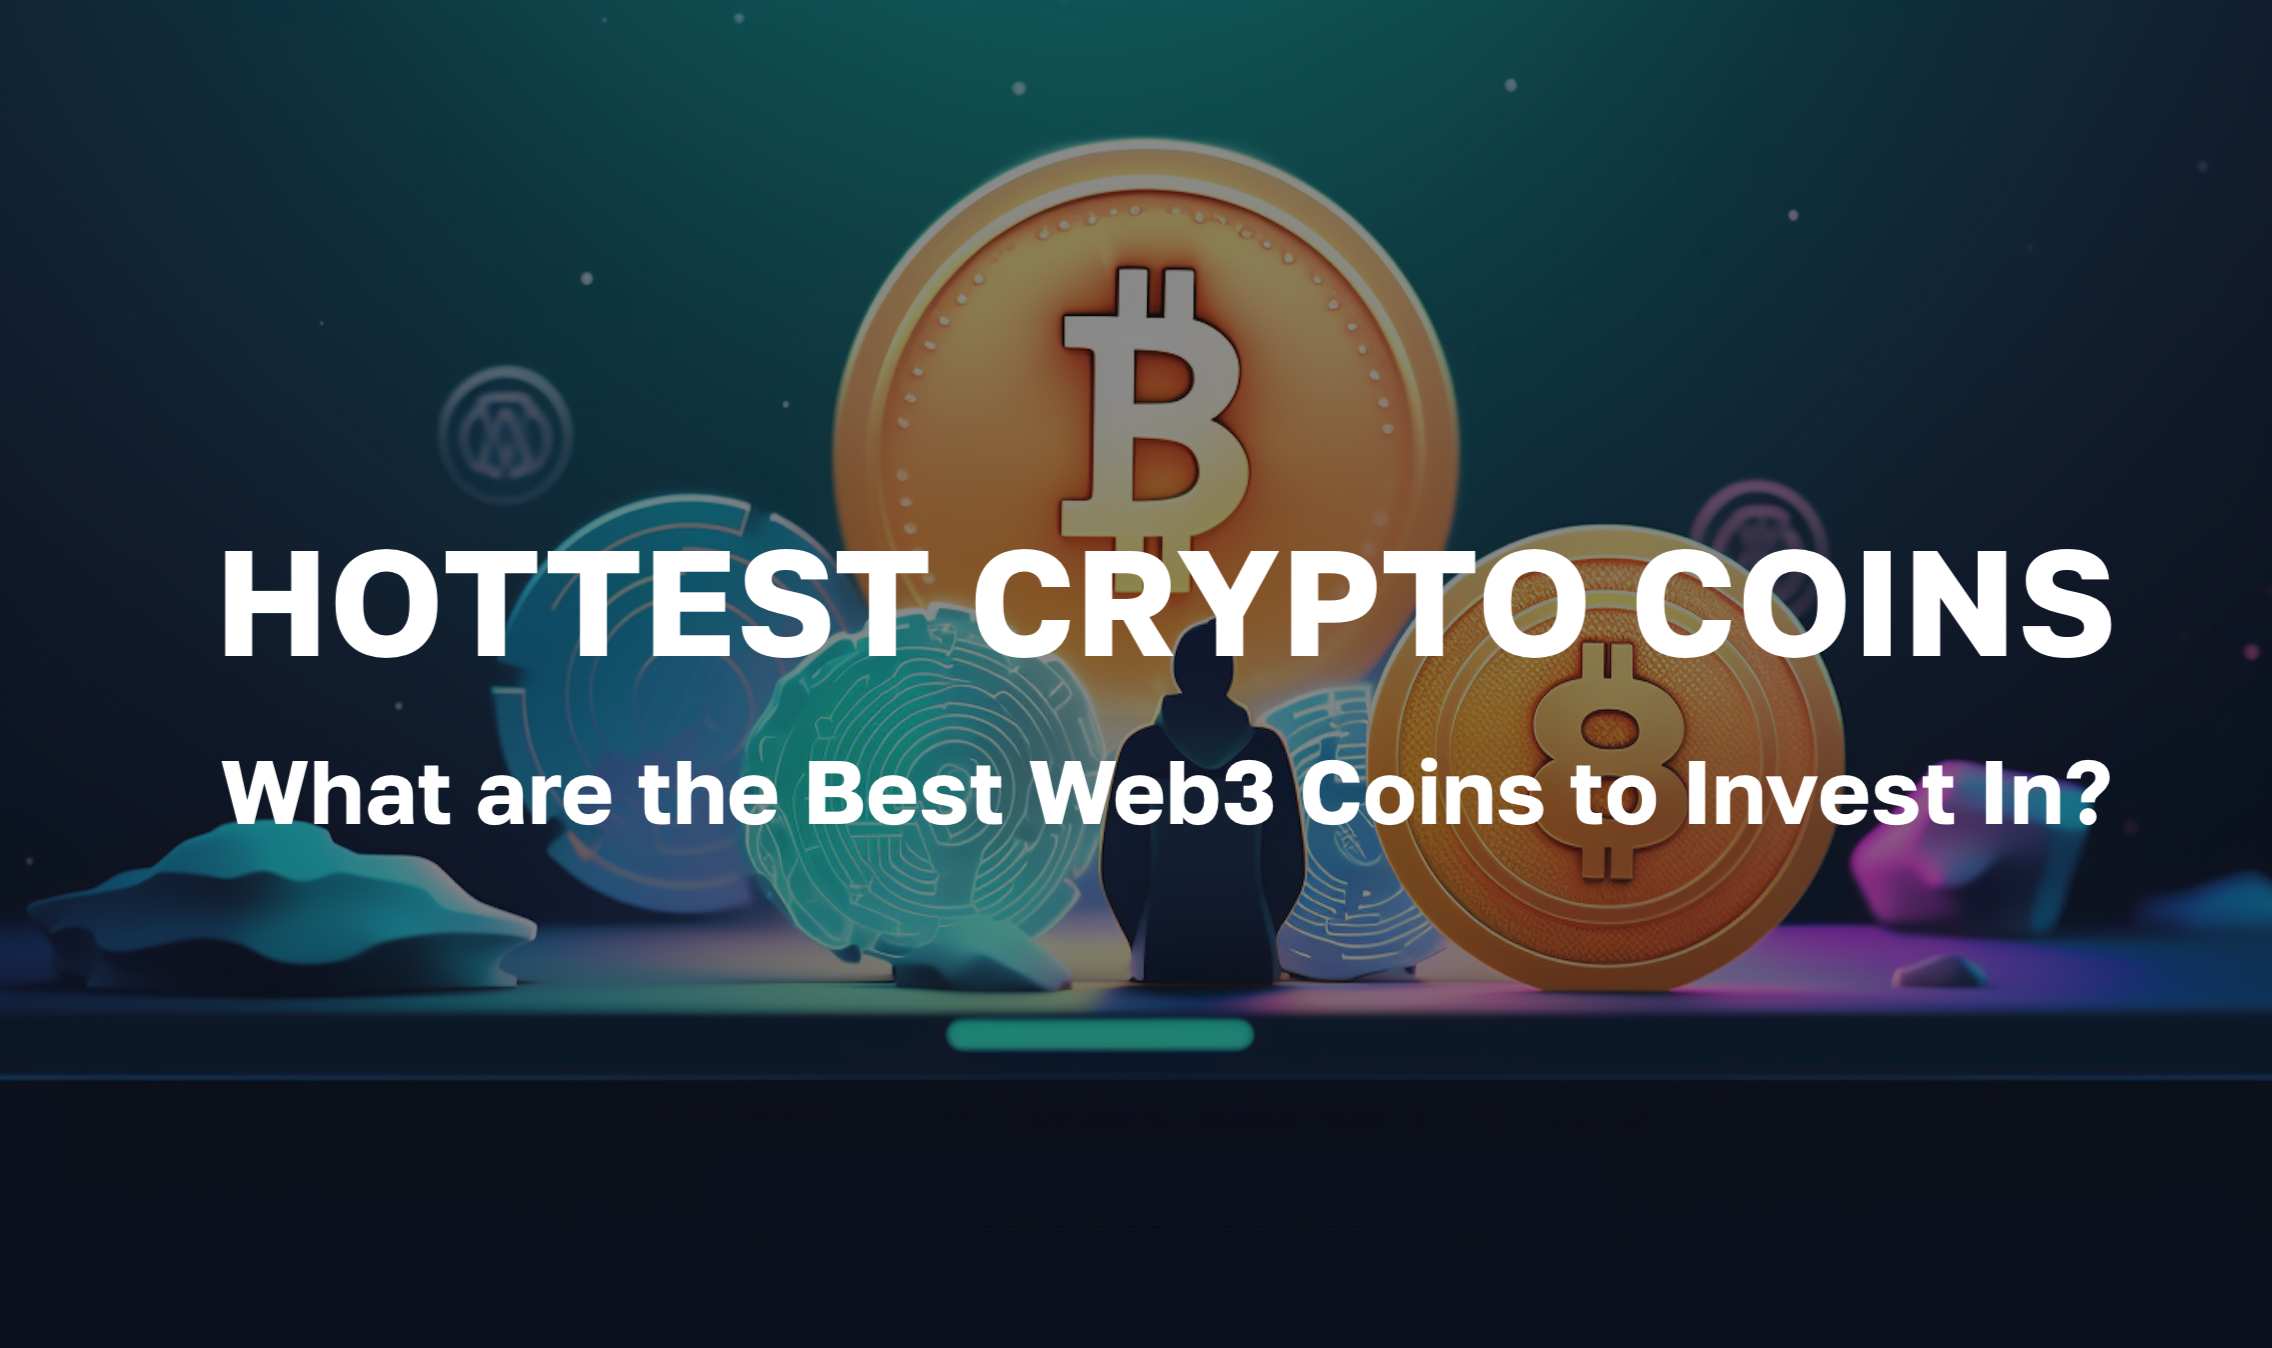 Hottest Crypto - What are the Best Web3 Coins to Invest In?